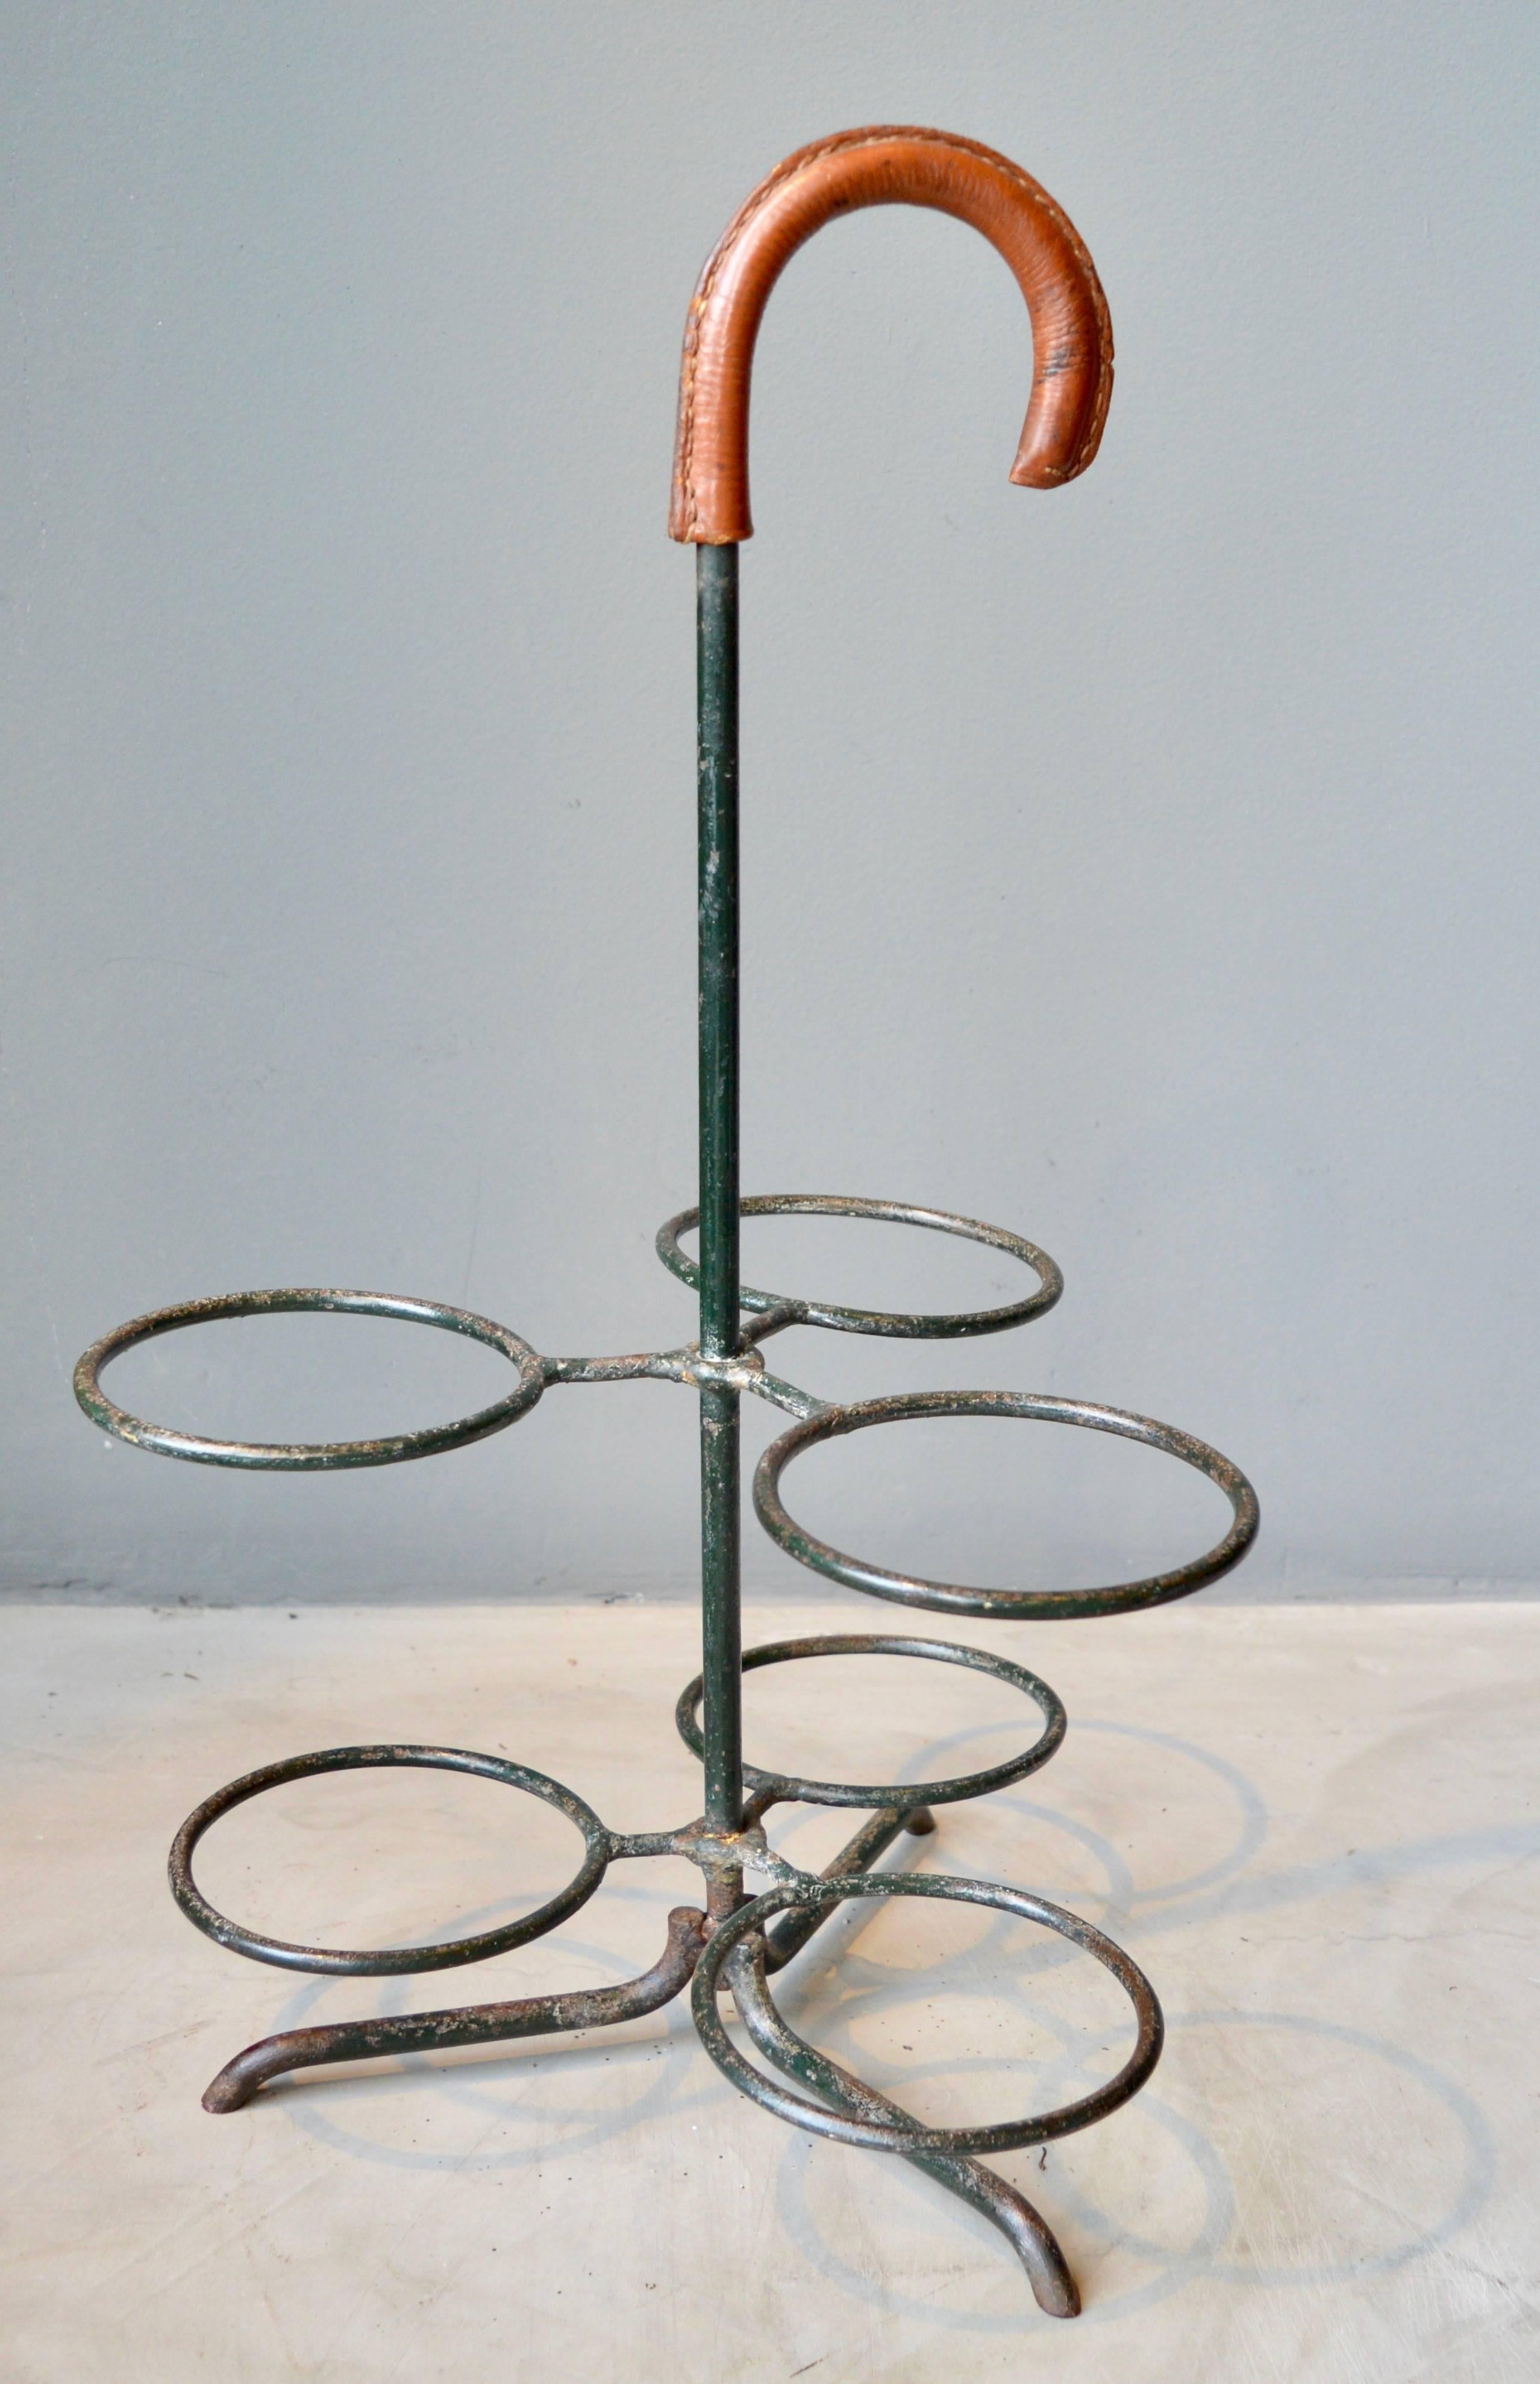 Handsome three bottle wine holder or umbrella stand by Jacques Adnet. Iron frame with saddle leather handle. Signature Adnet contrast stitching. Great patina to leather and iron. Excellent vintage condition.